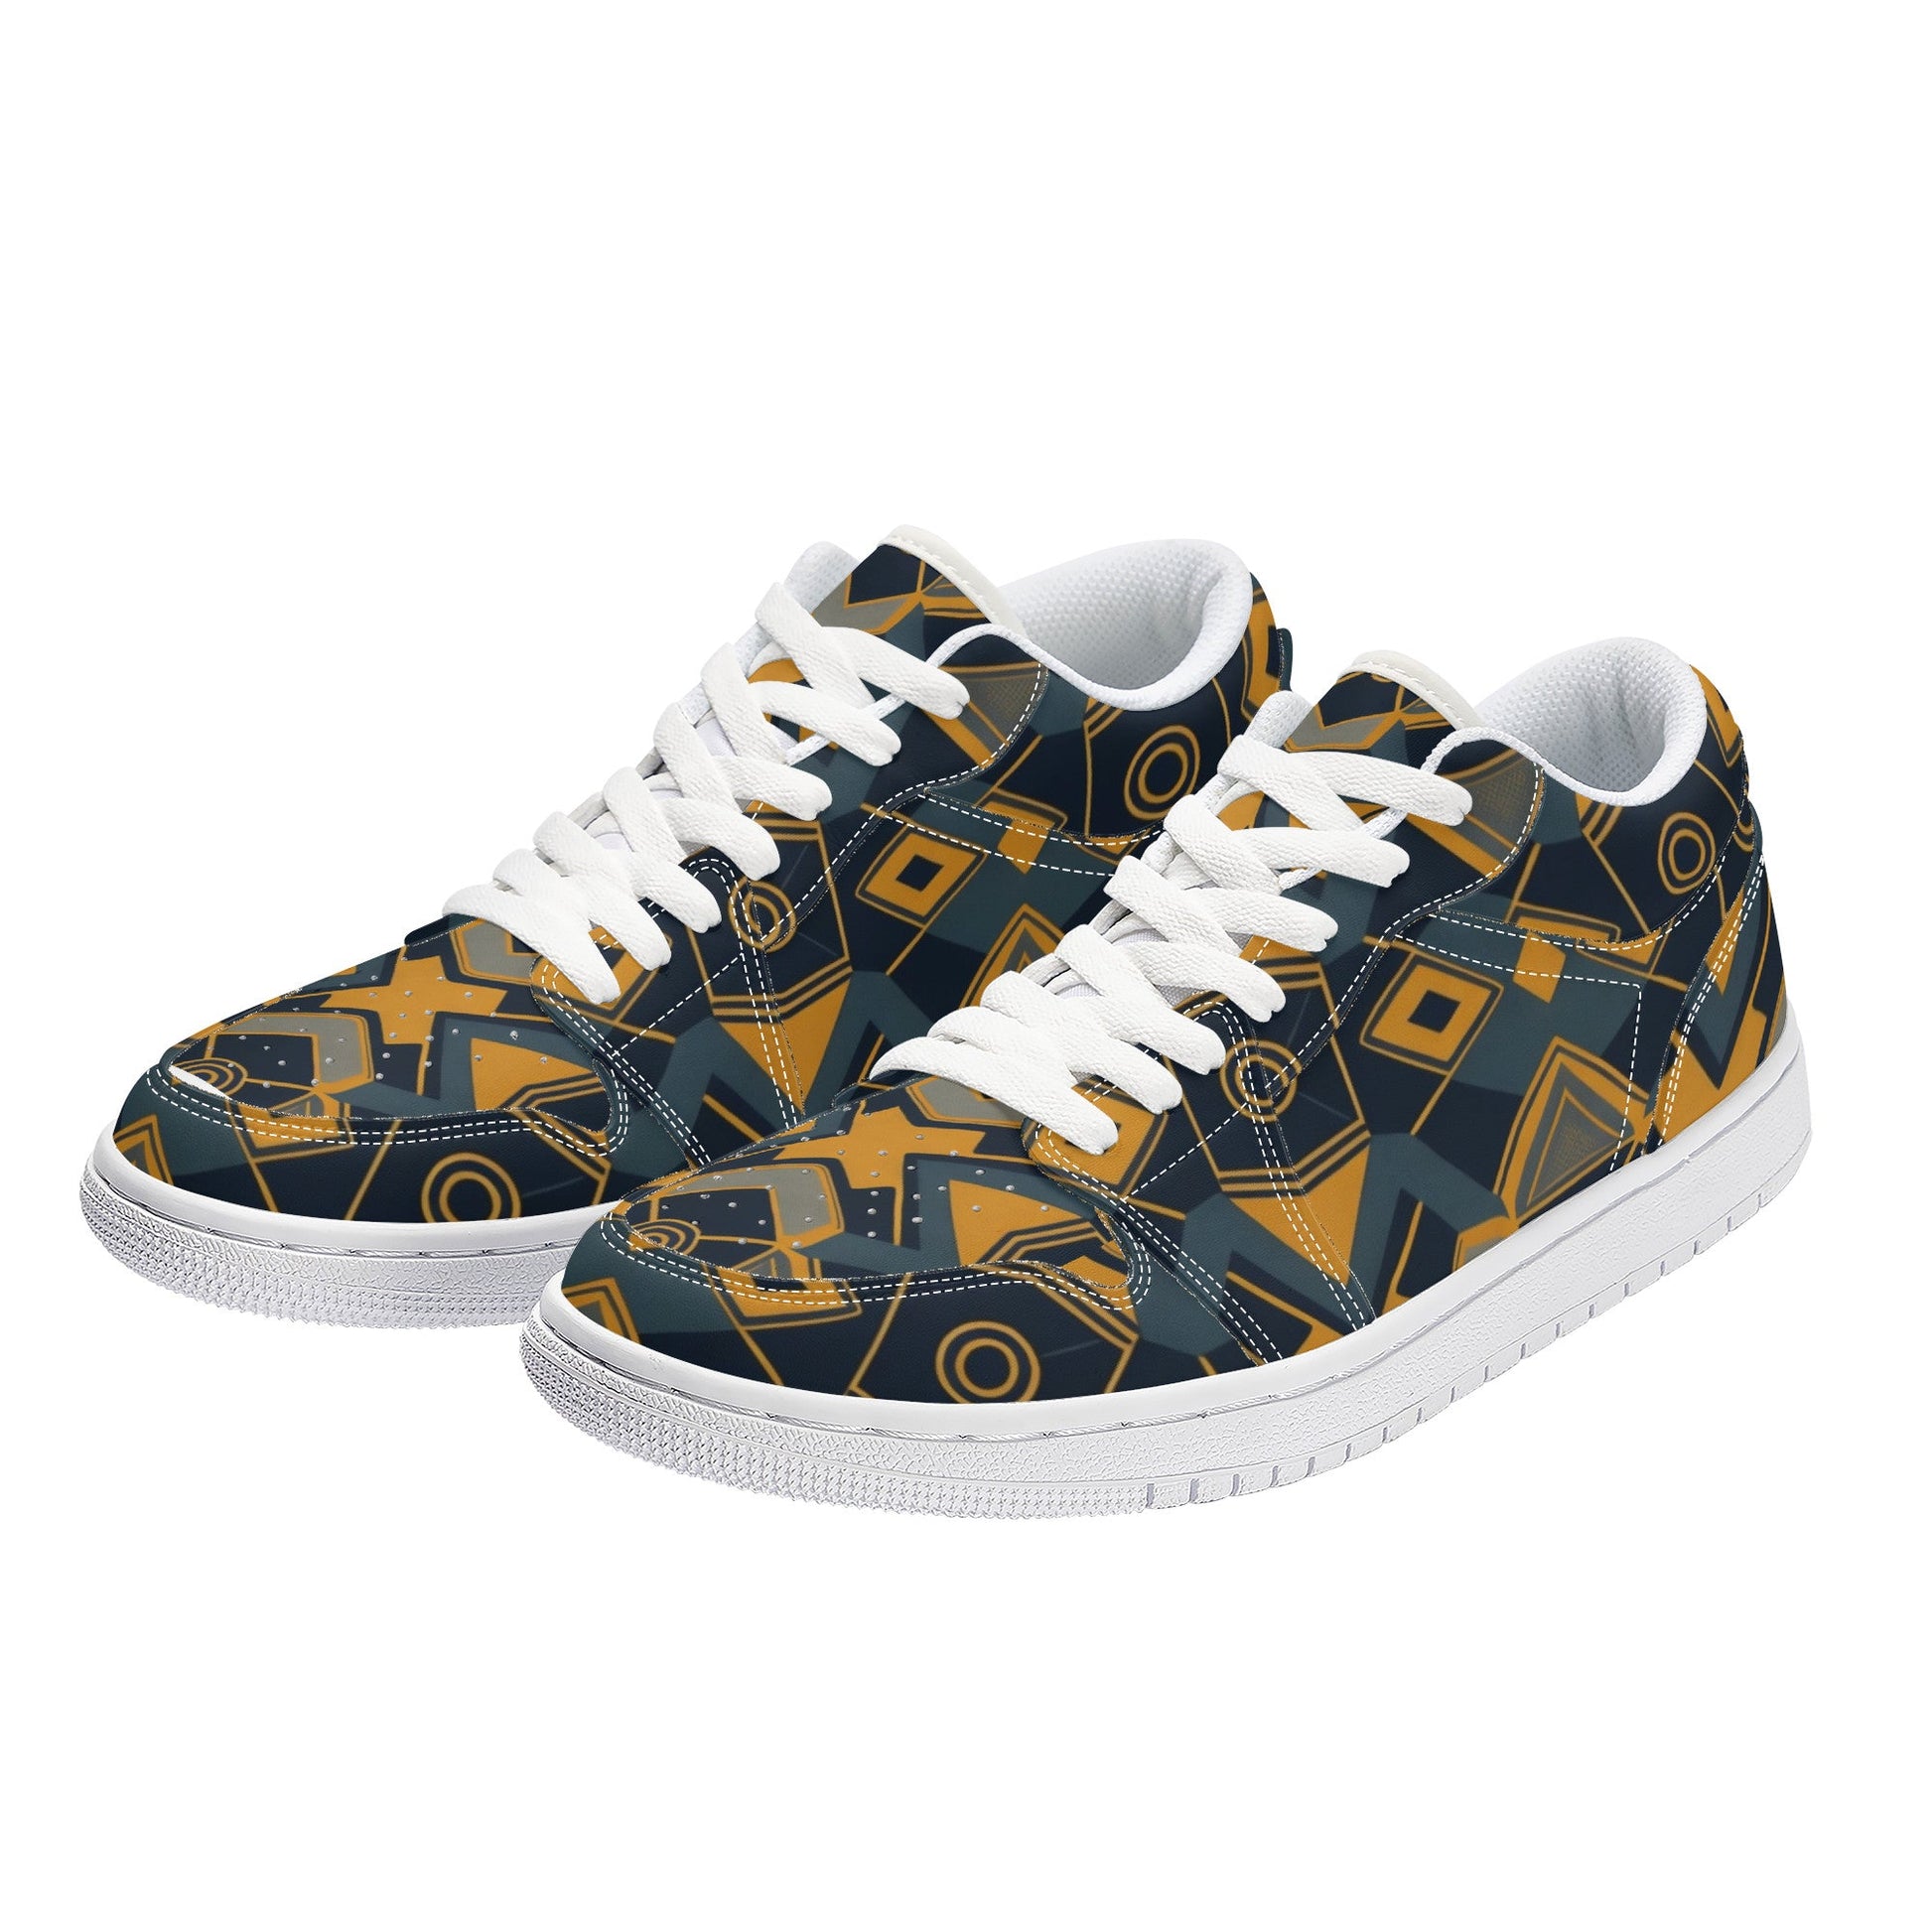 Designer Low Top Skateboard Sneakers X1 Colloid Colors 